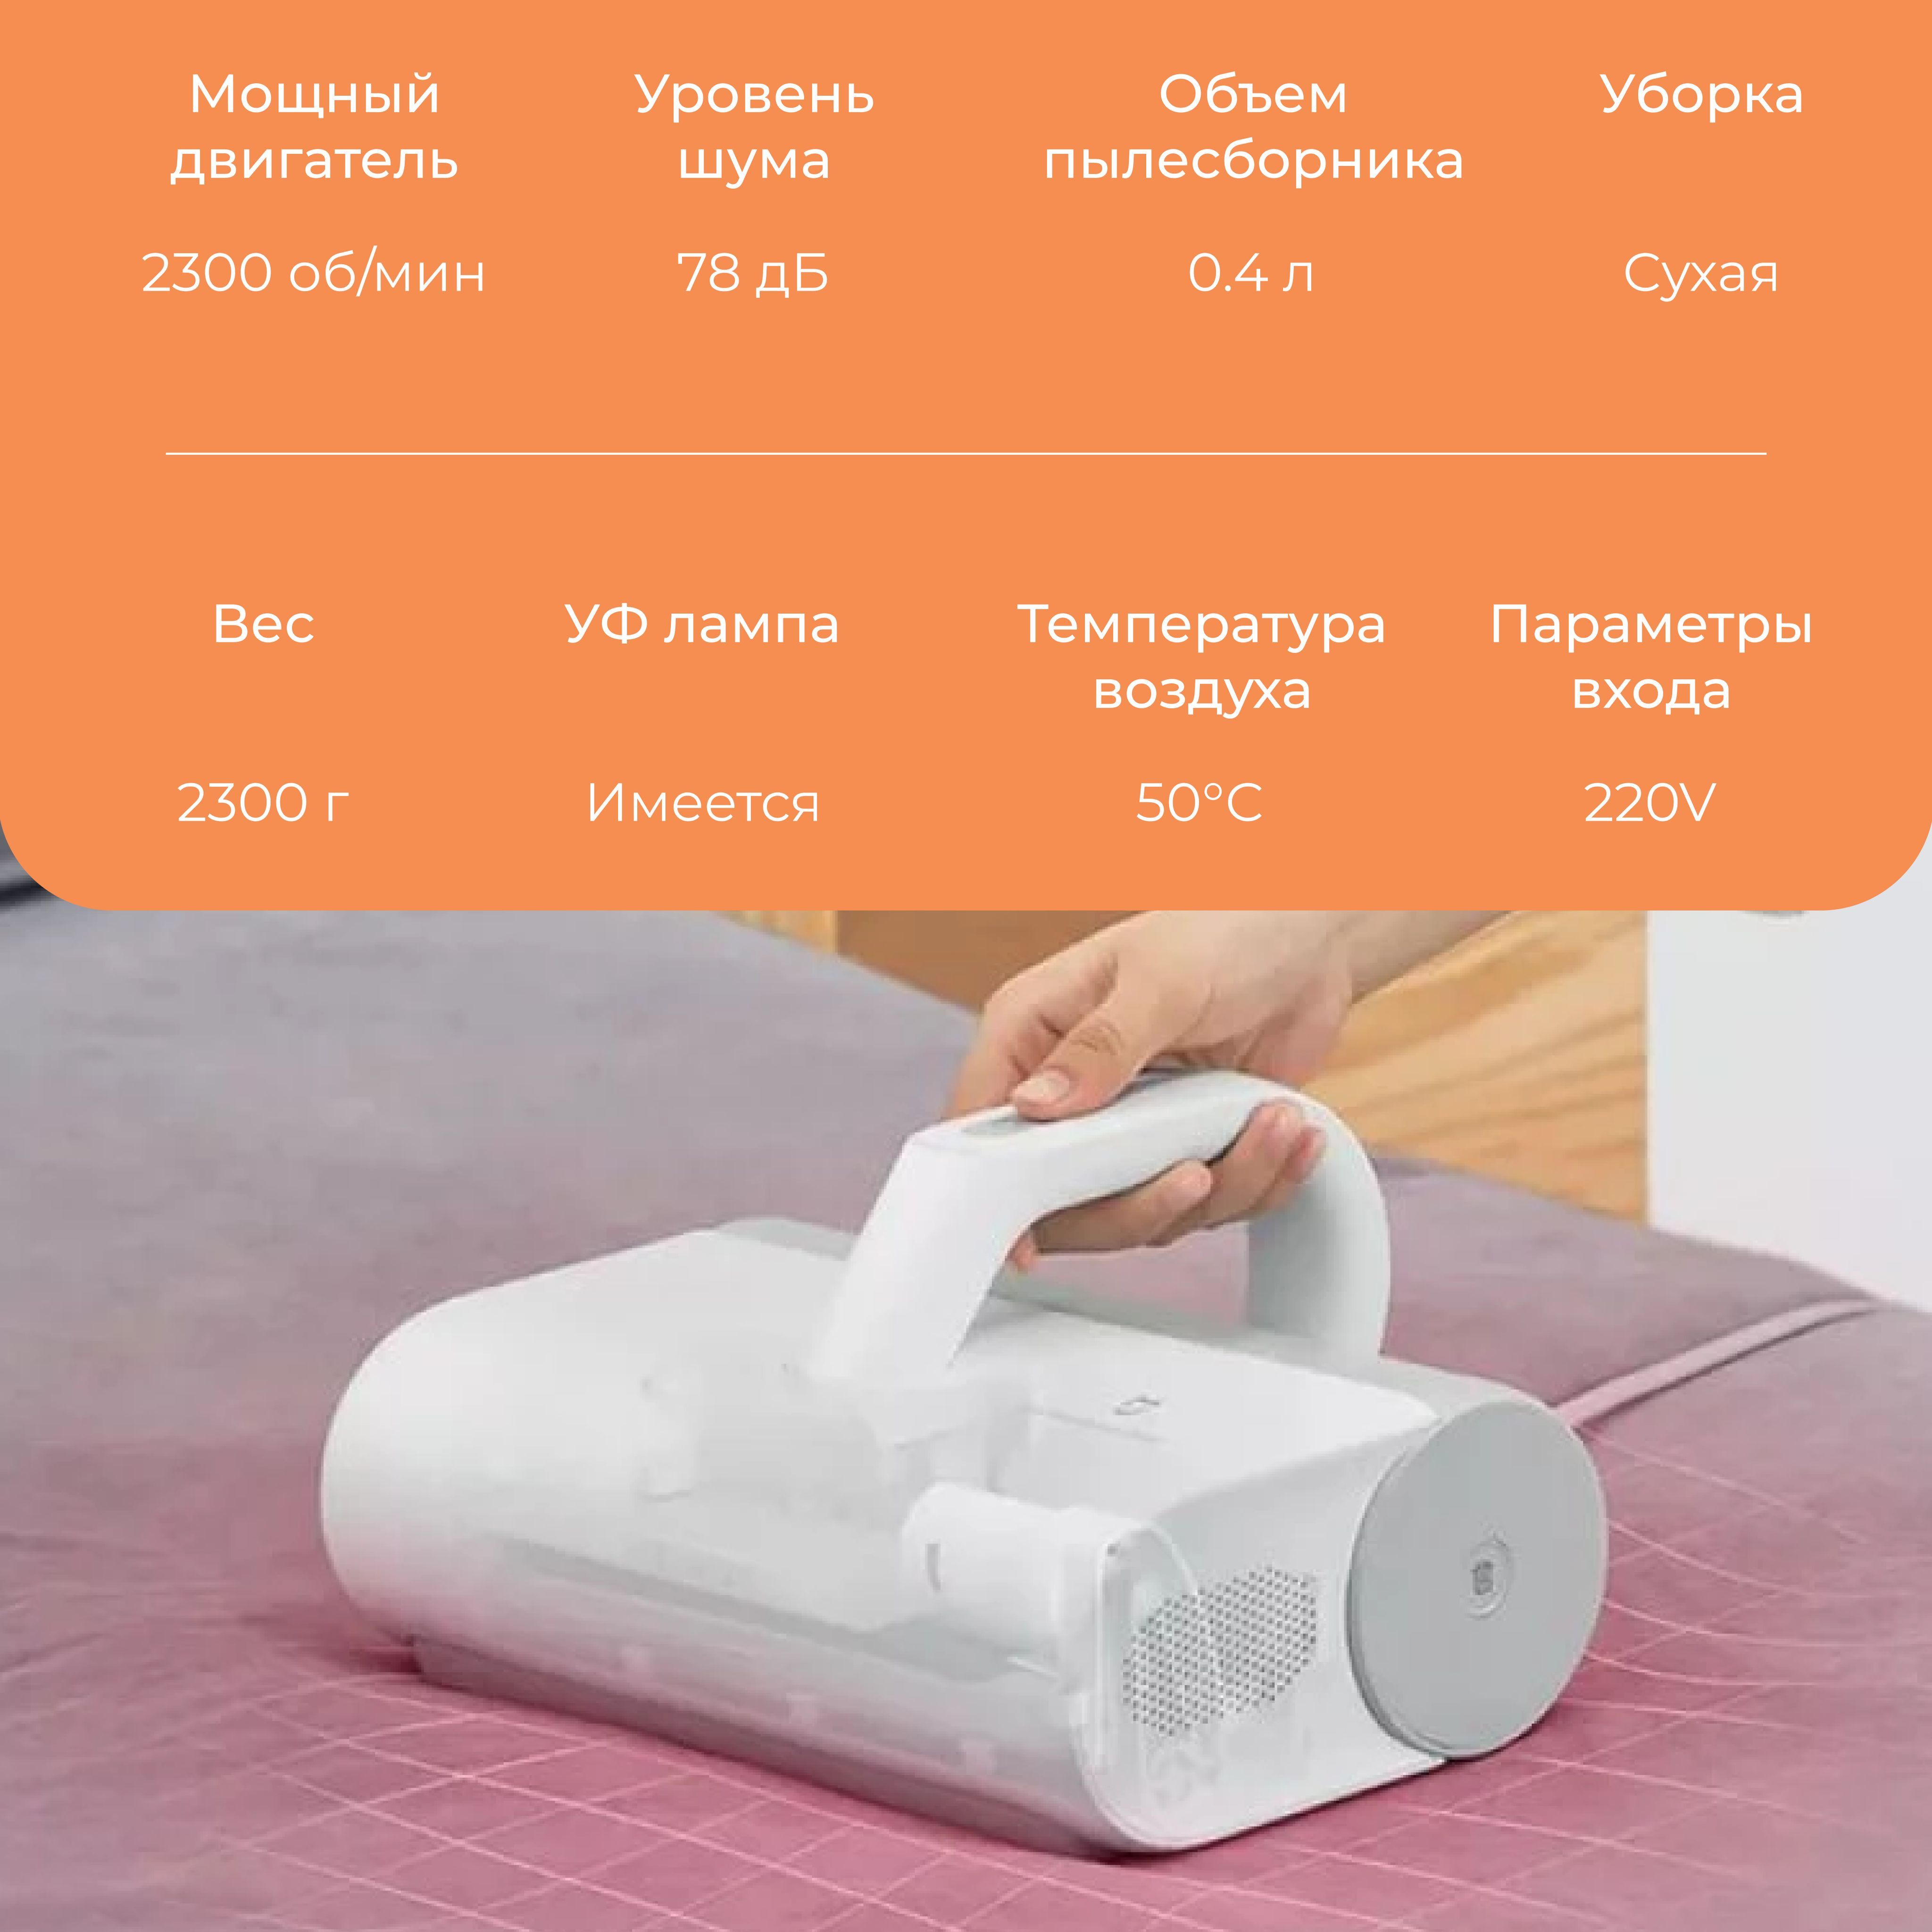 Mjcmy01dy dust mite vacuum cleaner. Пылесос Xiaomi (mjcmy01dy). Xiaomi Dust Mite Vacuum. Xiaomi Dust Mite Vacuum вилка. Xiaomi Mijia Dust Mite Vacuum Cleaner.